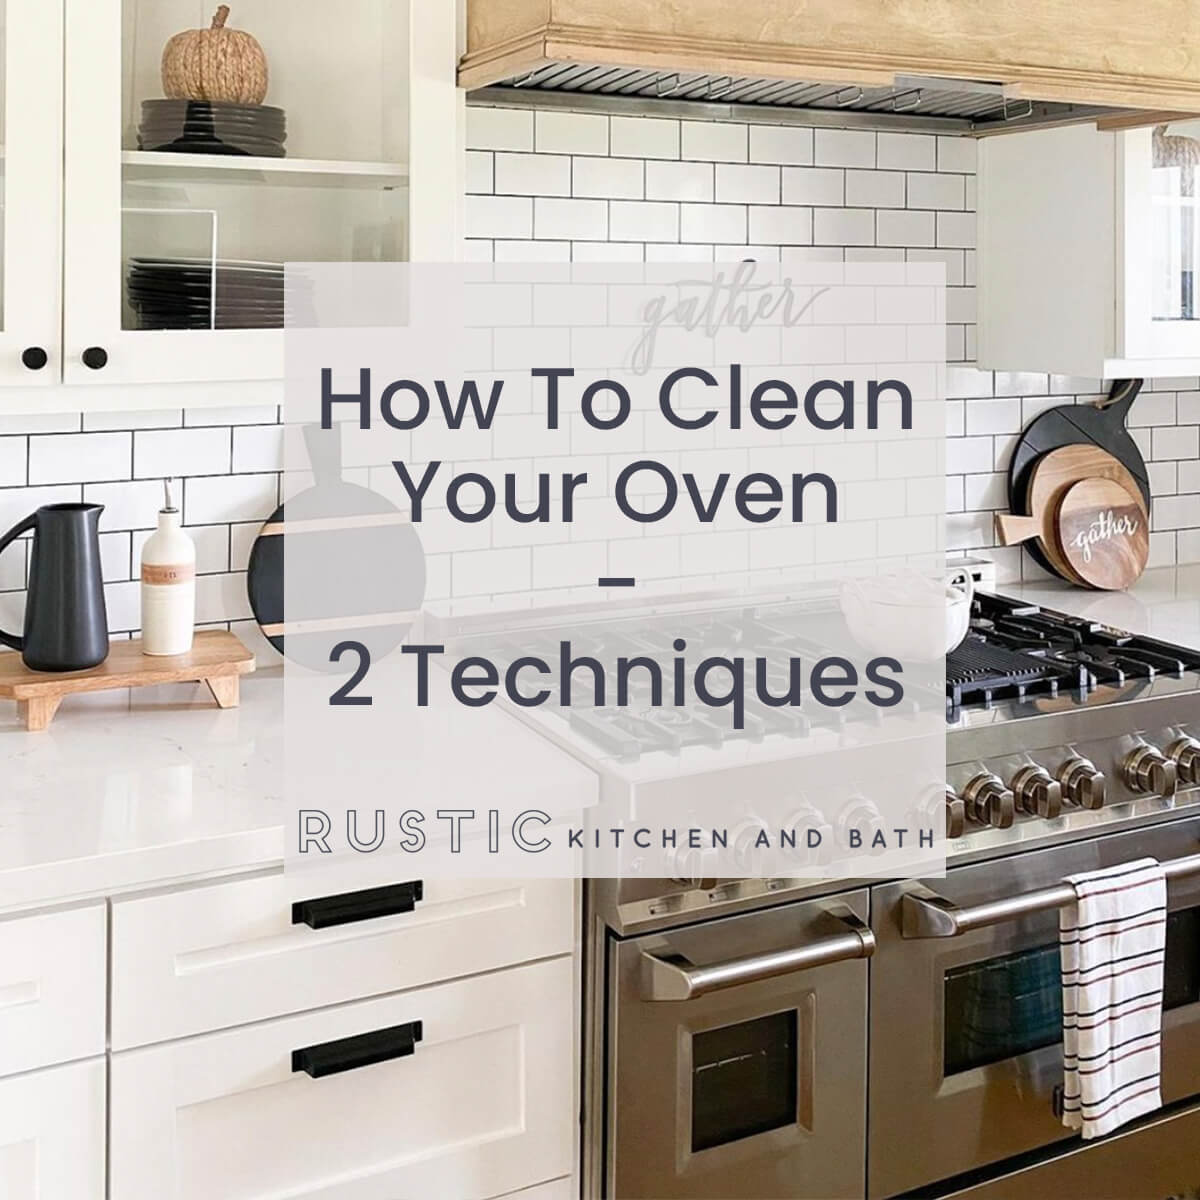 How To Clean Your Oven - 2 Techniques